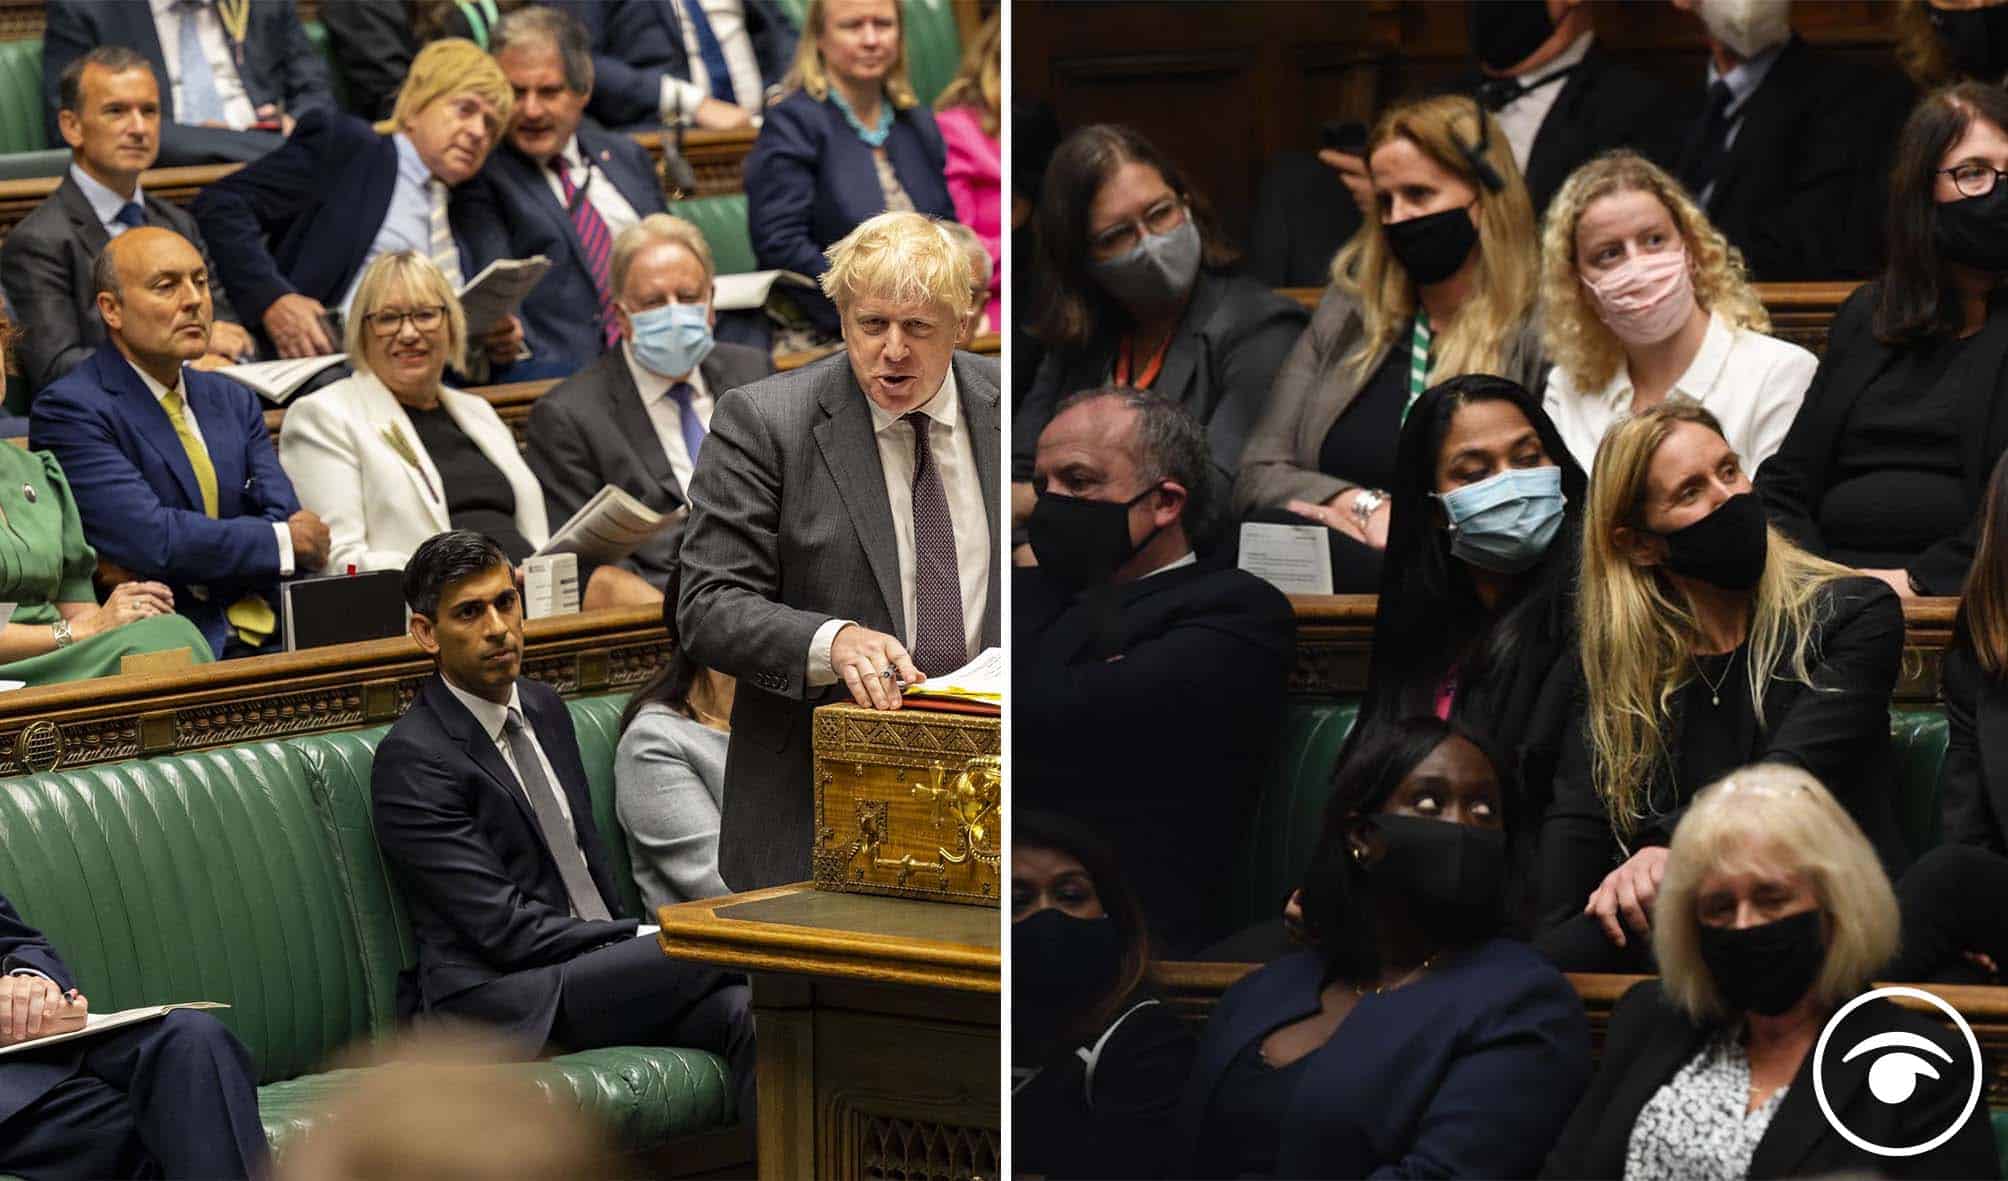 Tory MPs voice concerns over mask ‘obsession’ after they fail – again – to wear them in Commons